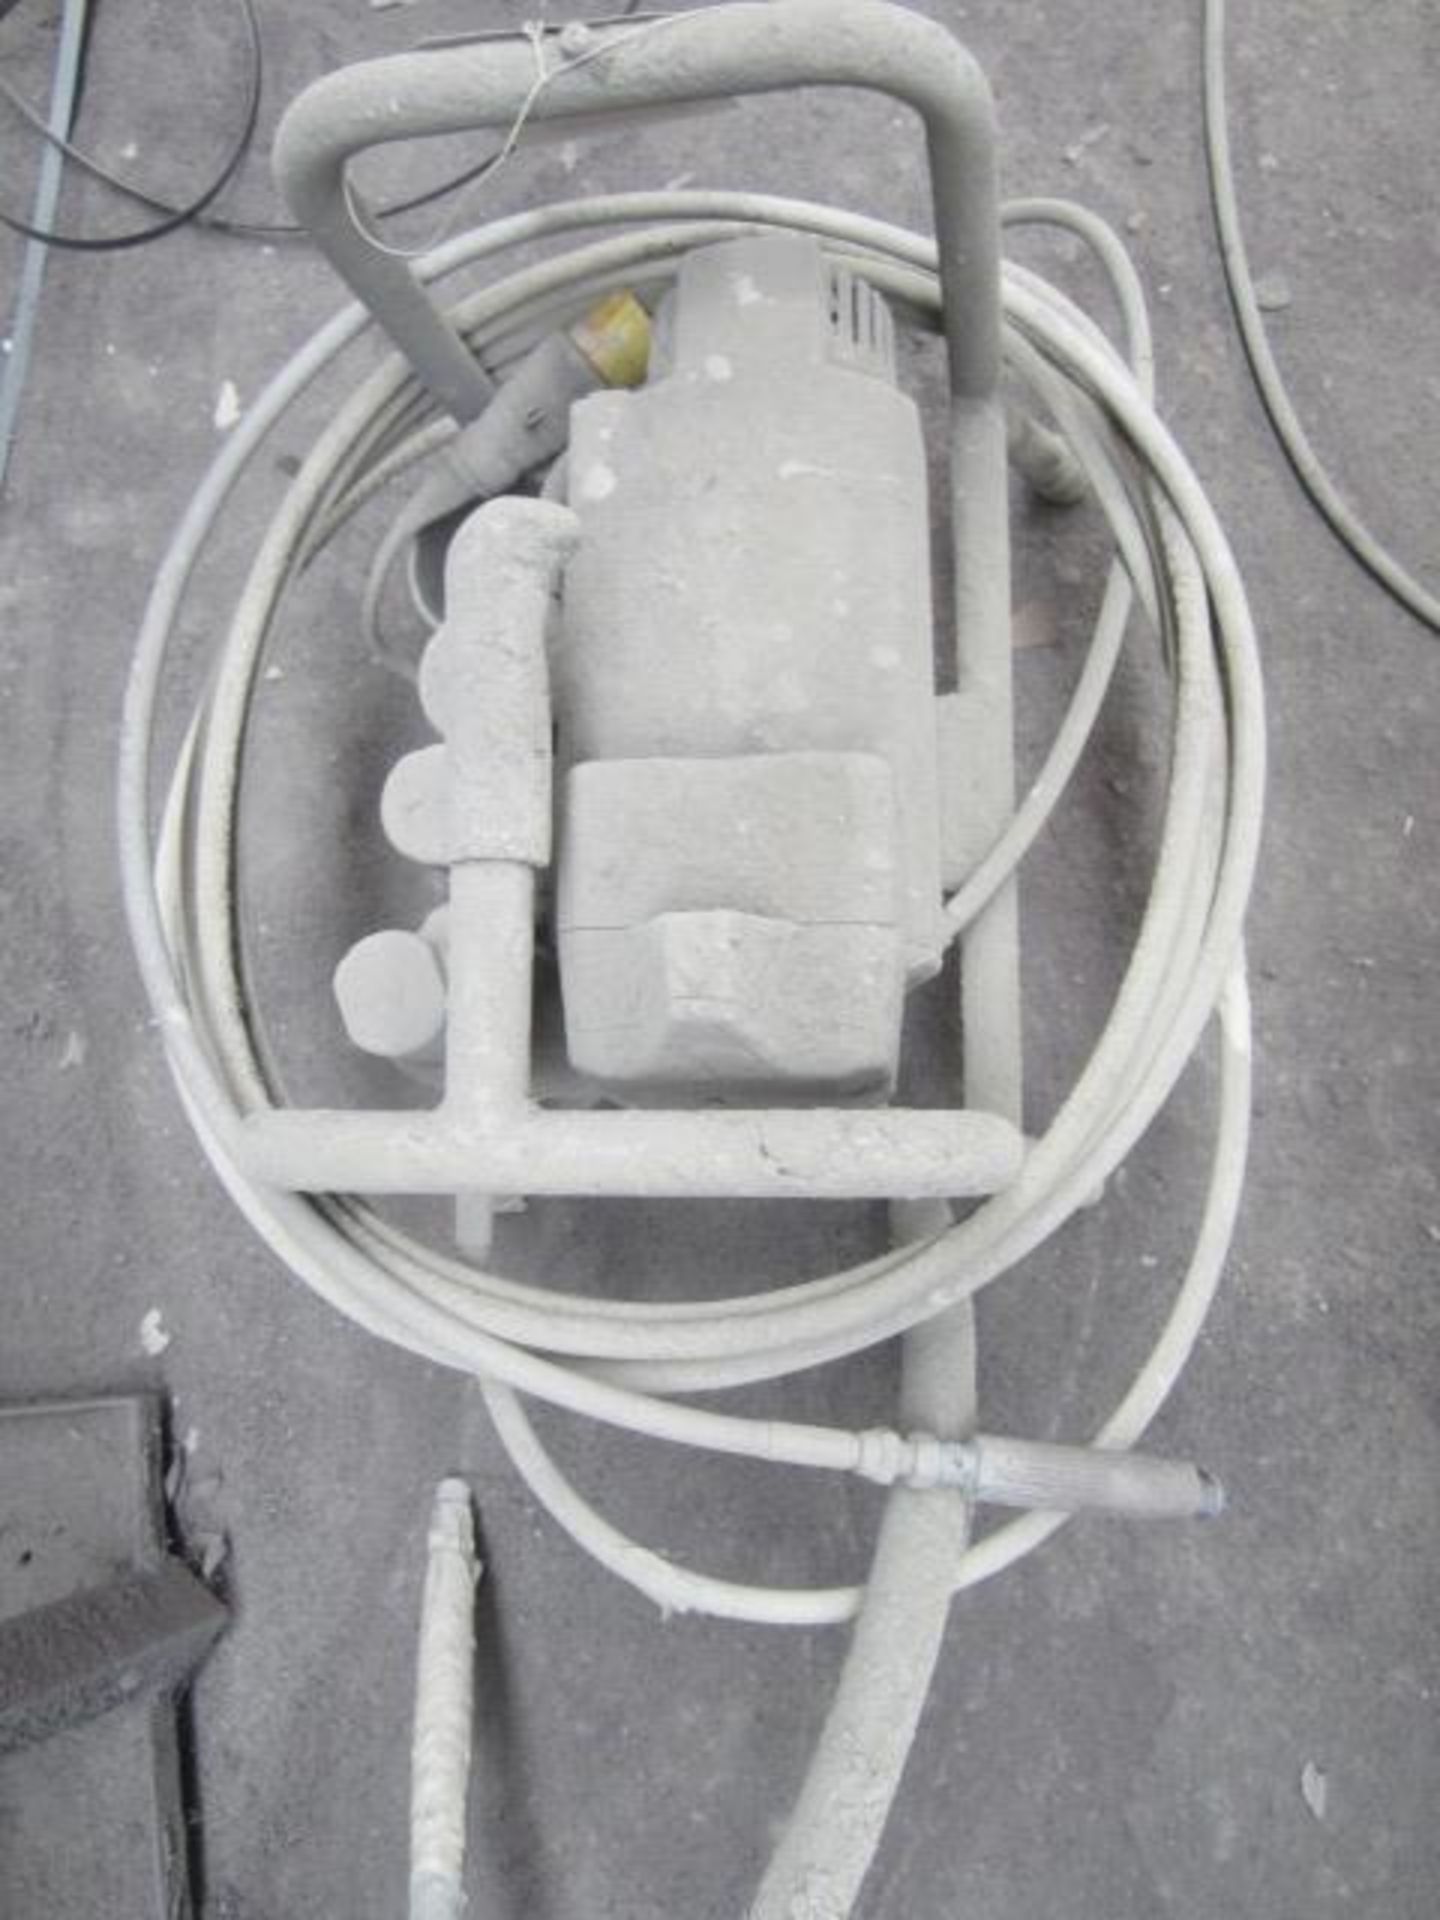 Unnamed 110v pneumatic paint spray pump - Image 2 of 2